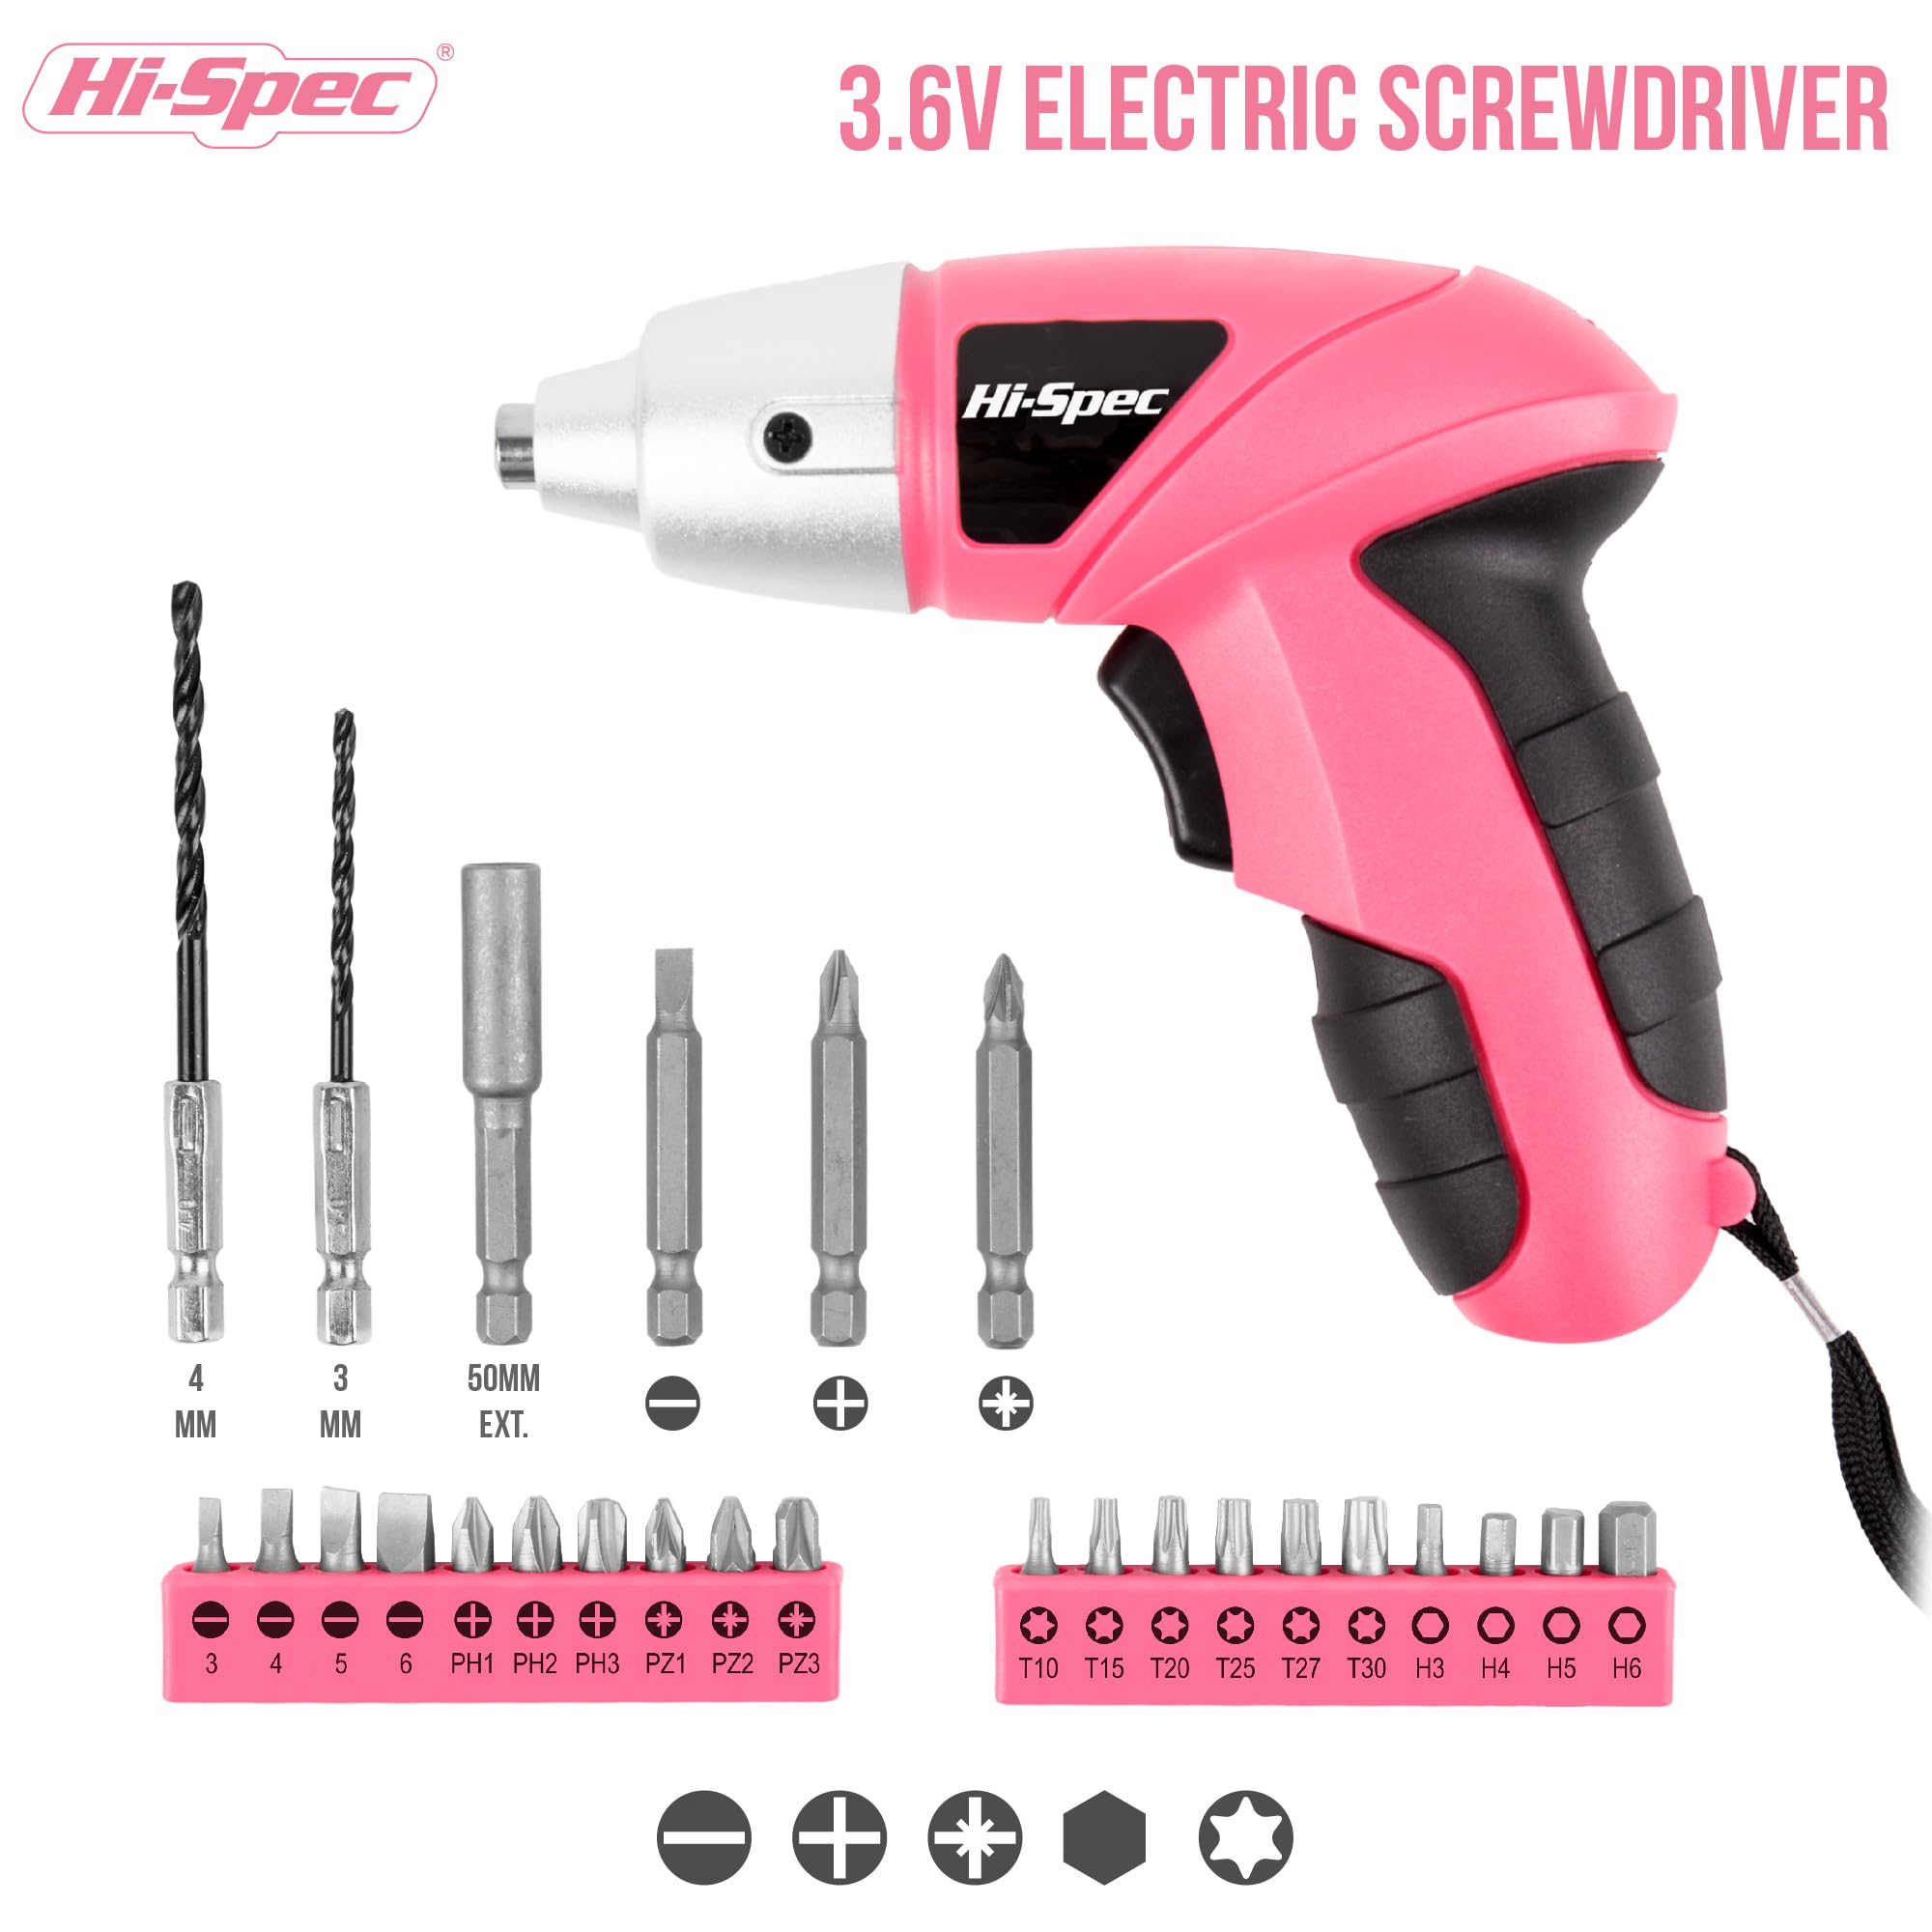 Hi-Spec 27 Pc Electric Screwdriver Pink 3.6V with 23 Drill Bit Set for Woman. Cordless Screwdriver Tool with USB Rechargeable Battery and LED Light for DIY Home & Office